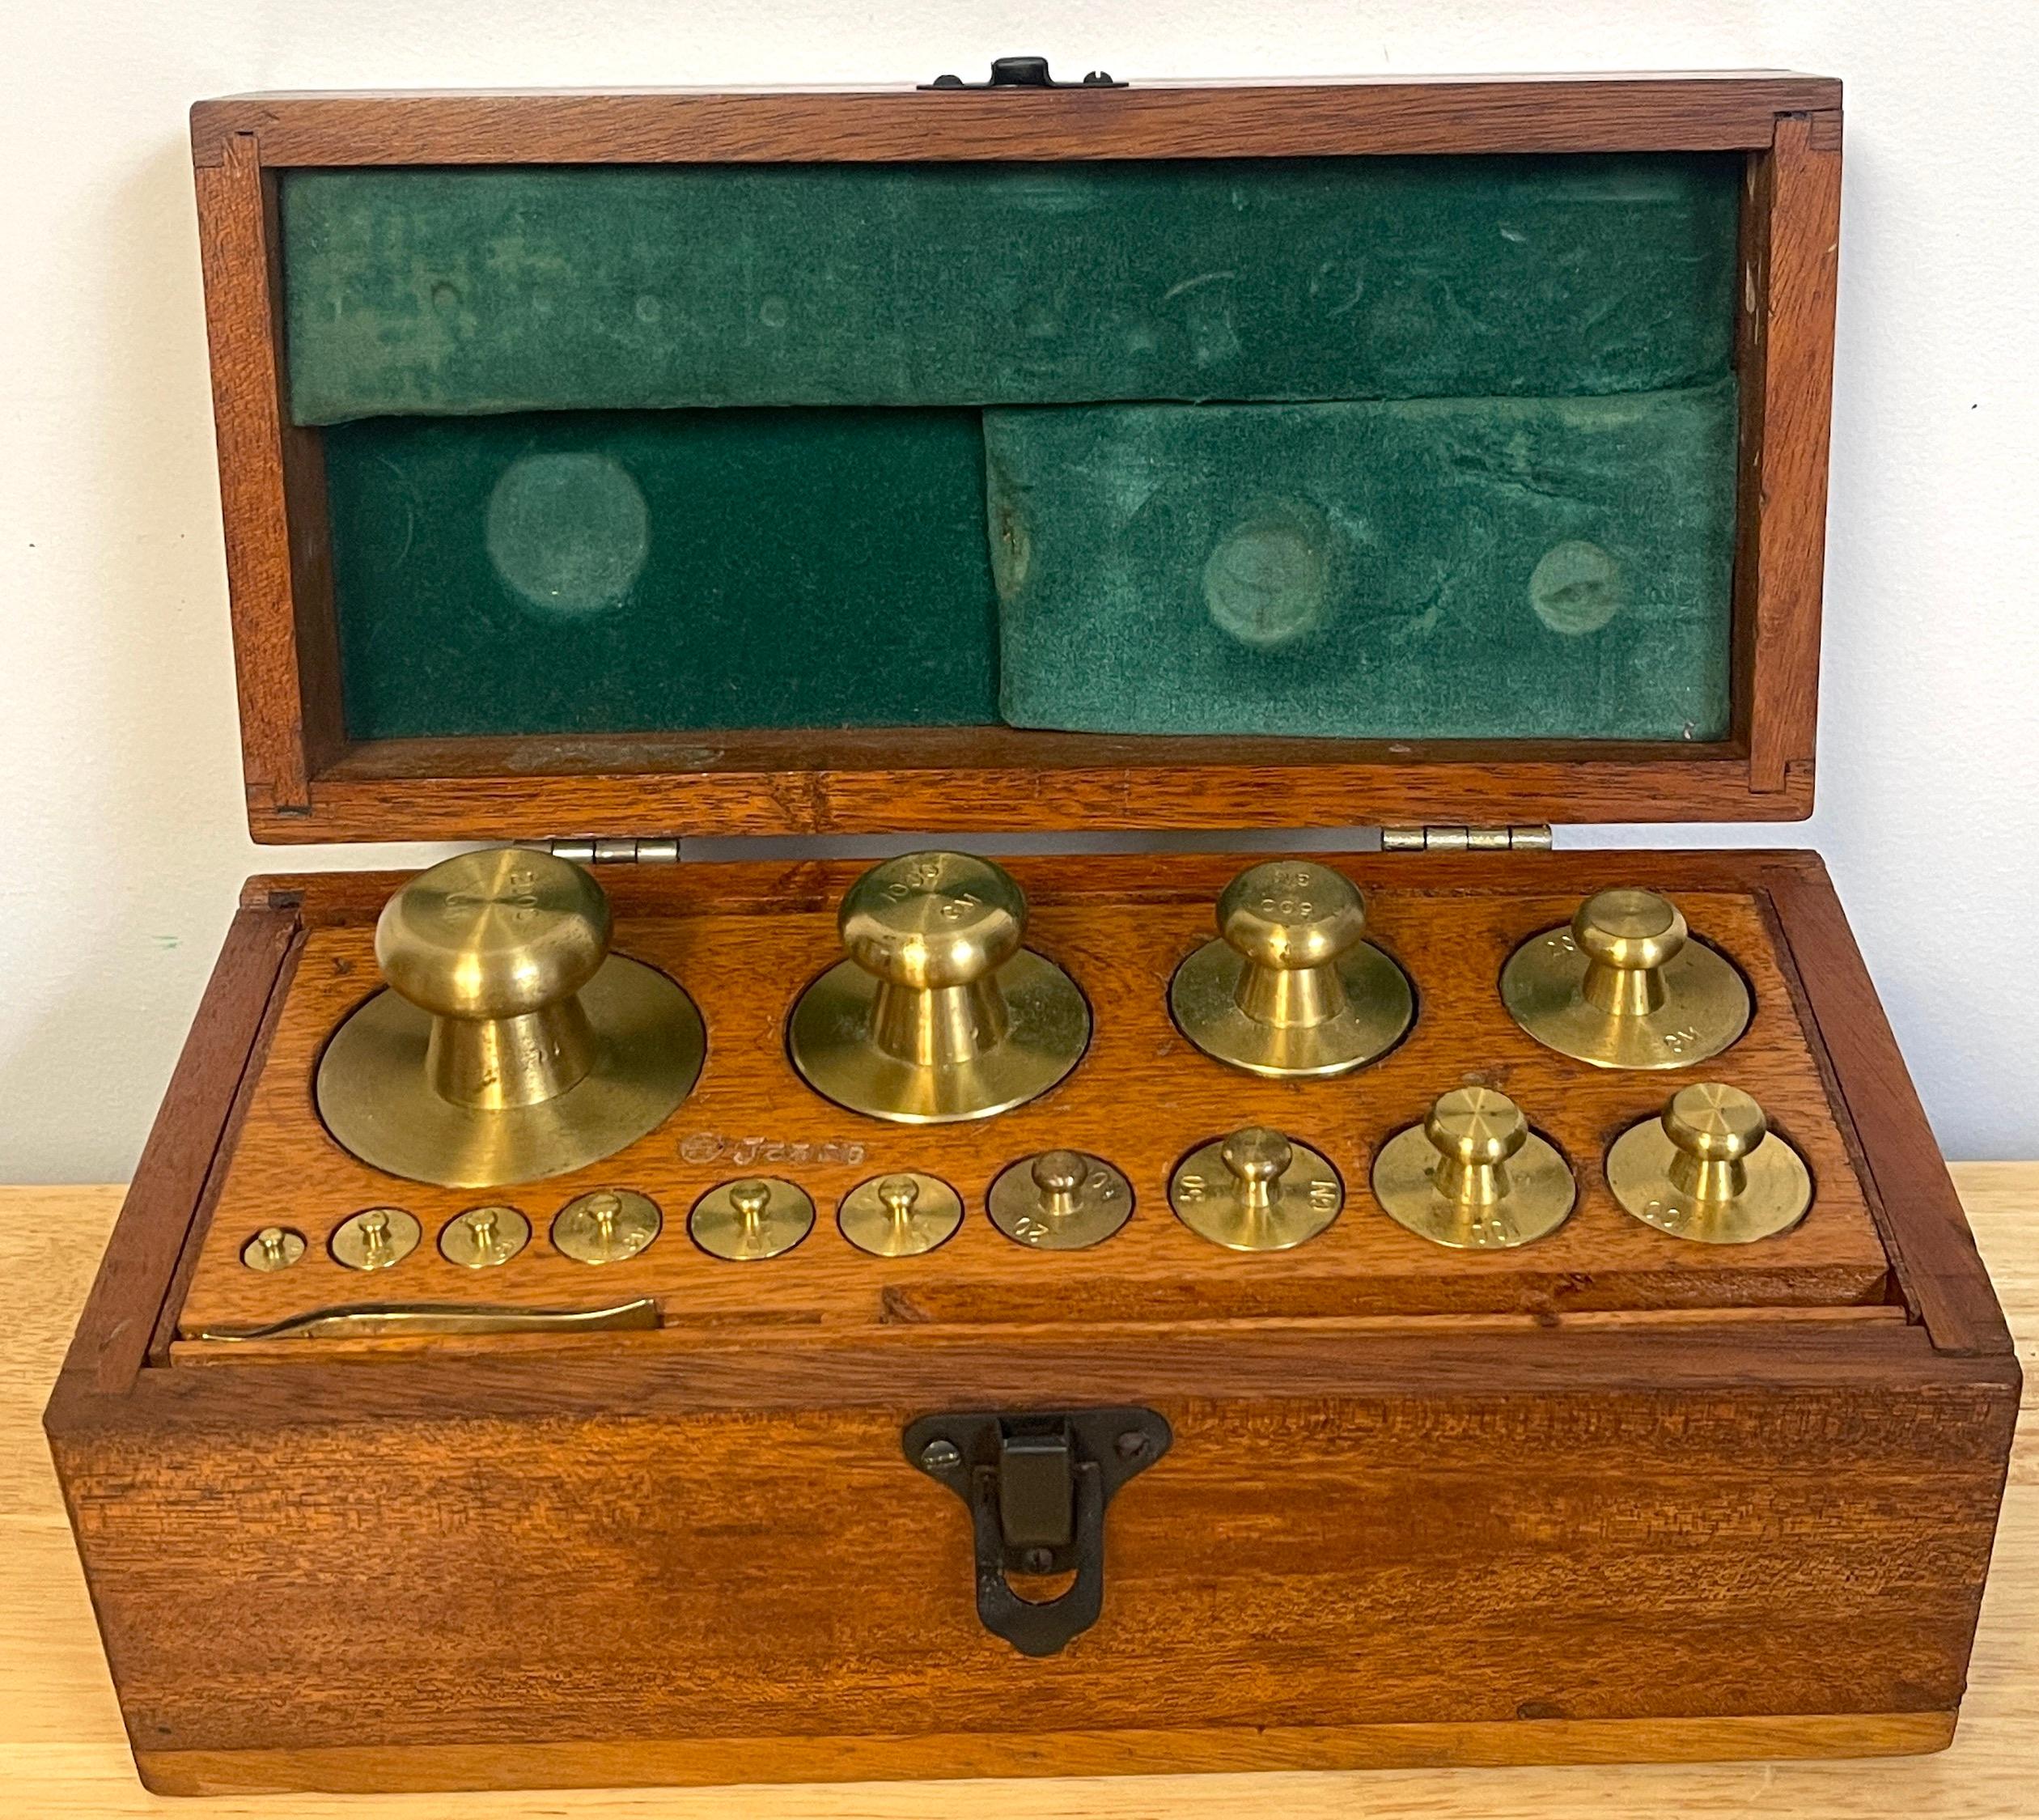 Antique Fisher- Scientific Brass & Oak Complete Calibration Weight Set
USA, Circa 1940s 

Originating from the USA, with locations in Canada and dating back to the 1940s, this is a rare and remarkable find—a complete 15-piece set of solid brass